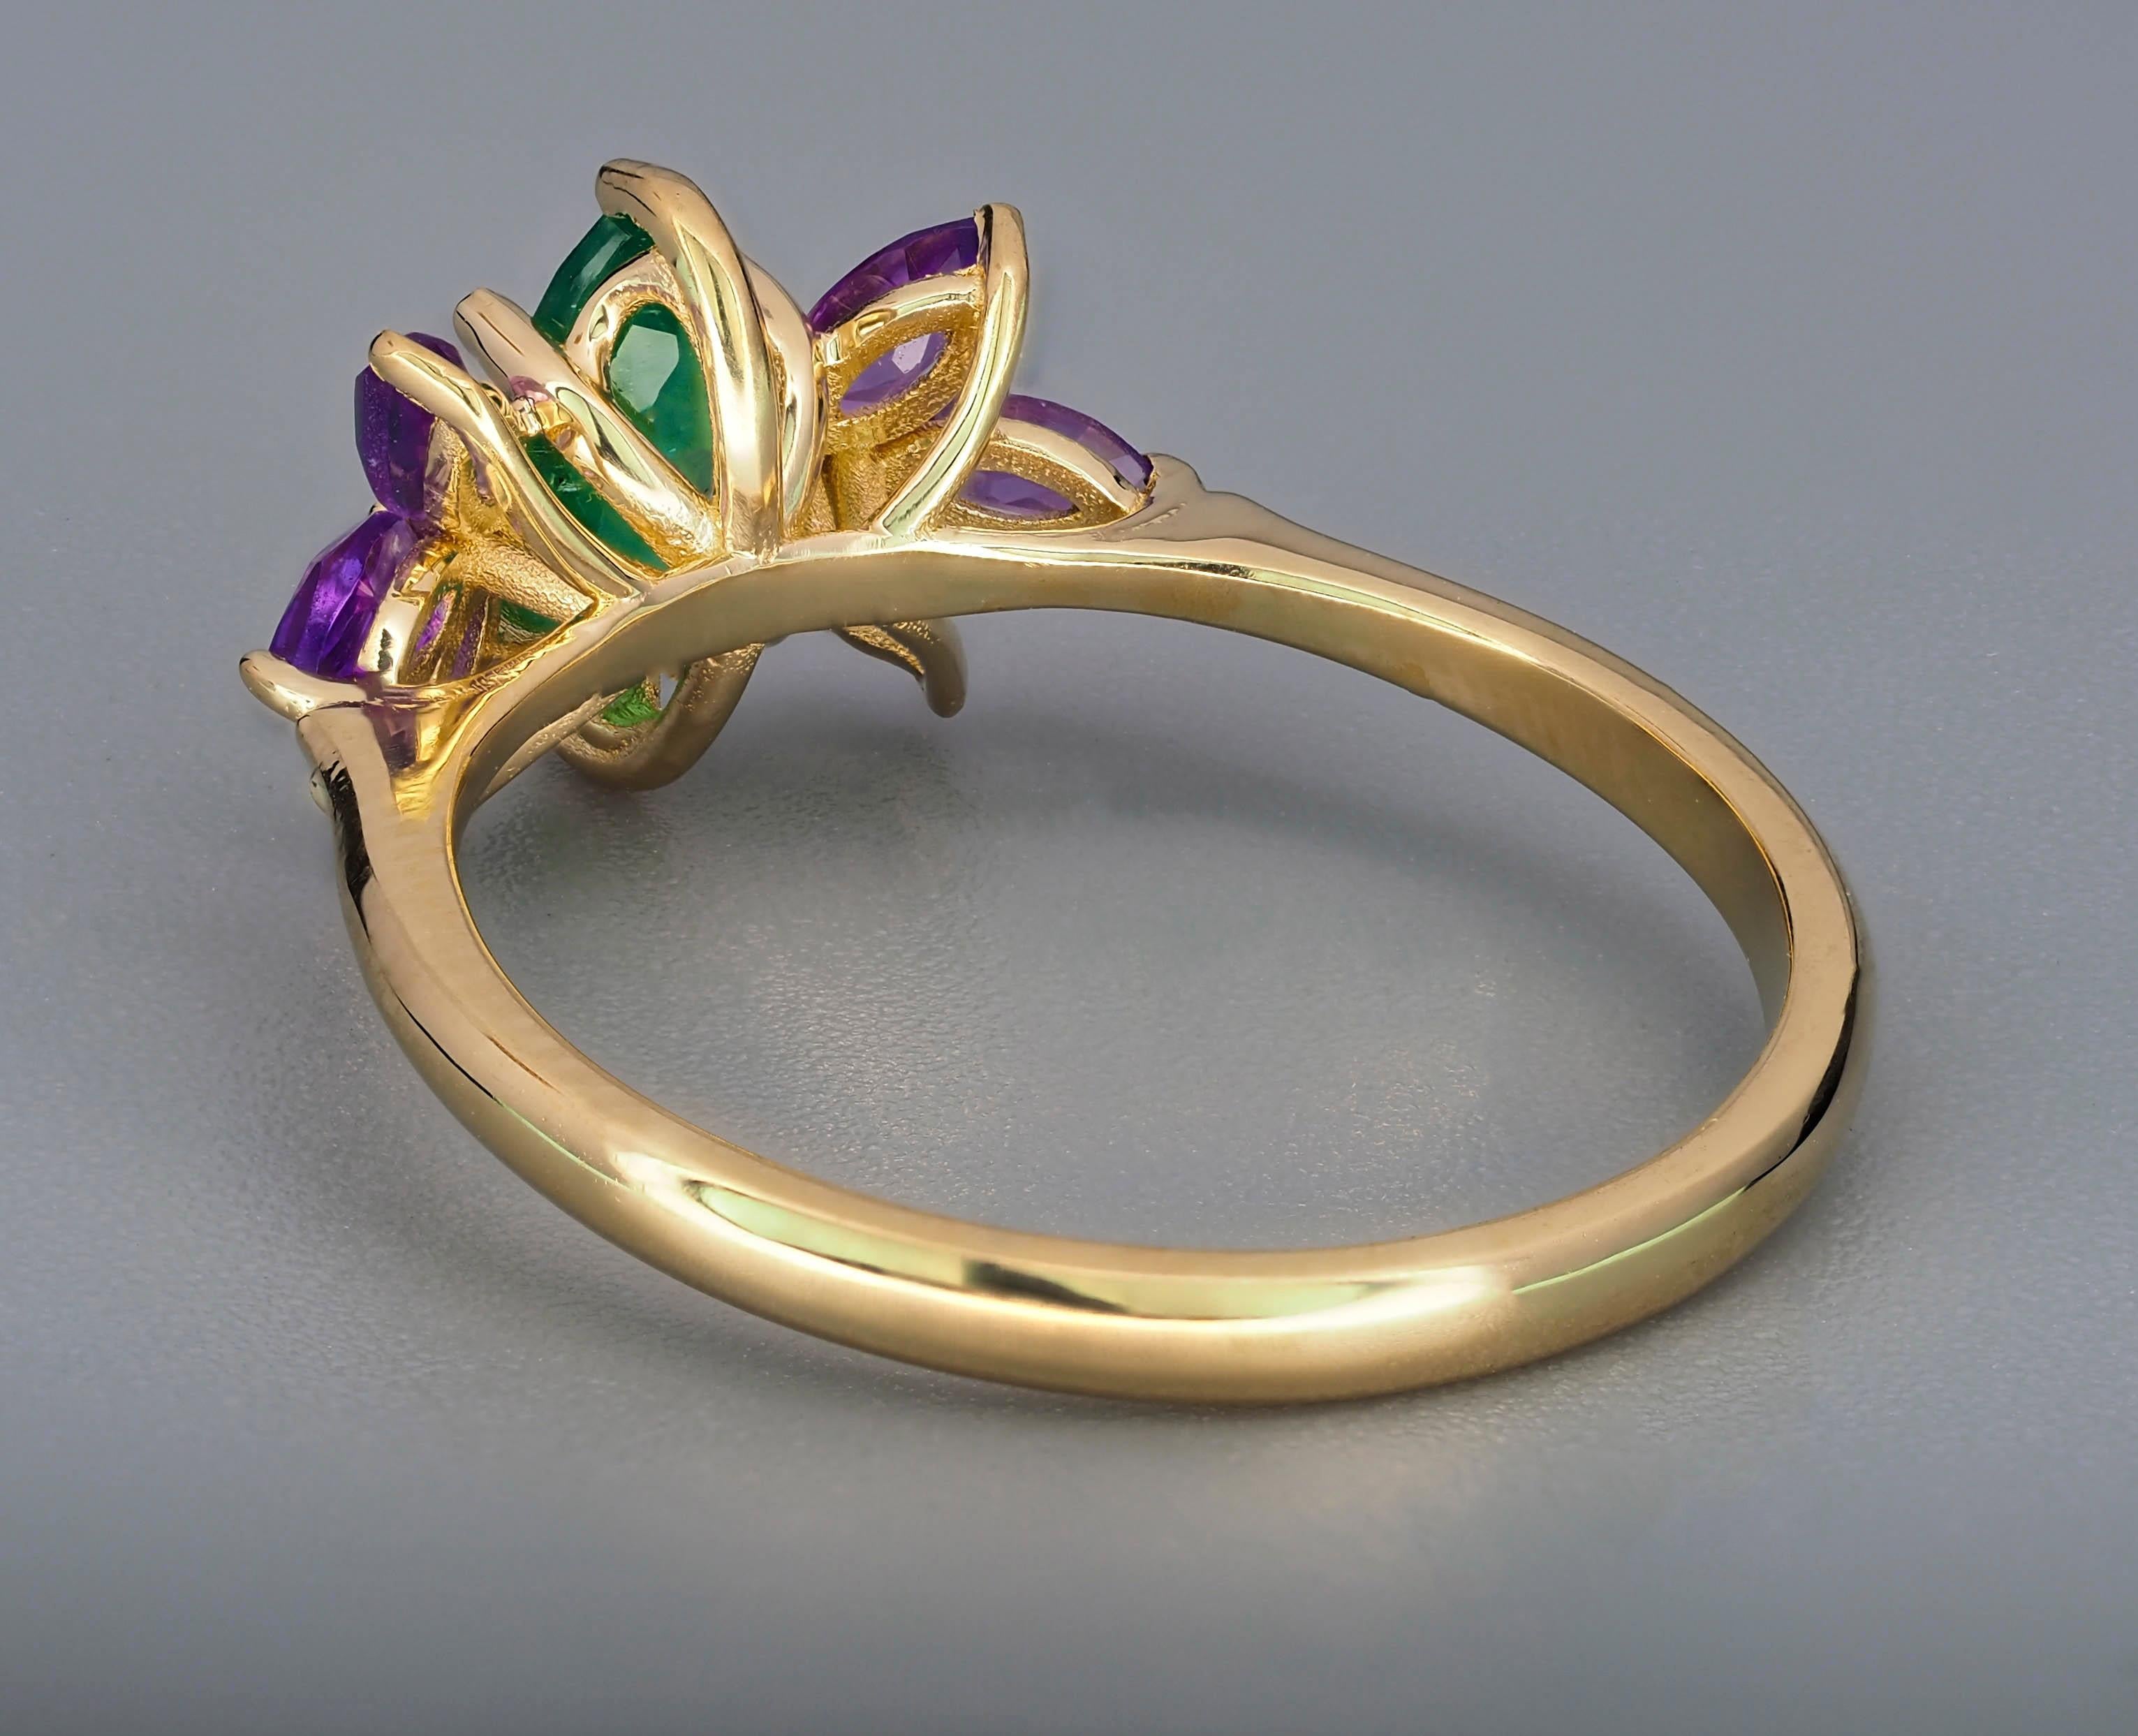 For Sale:  Emerald gold ring. 14k Gold Ring with Marquise Emerald and Amethysts.  7